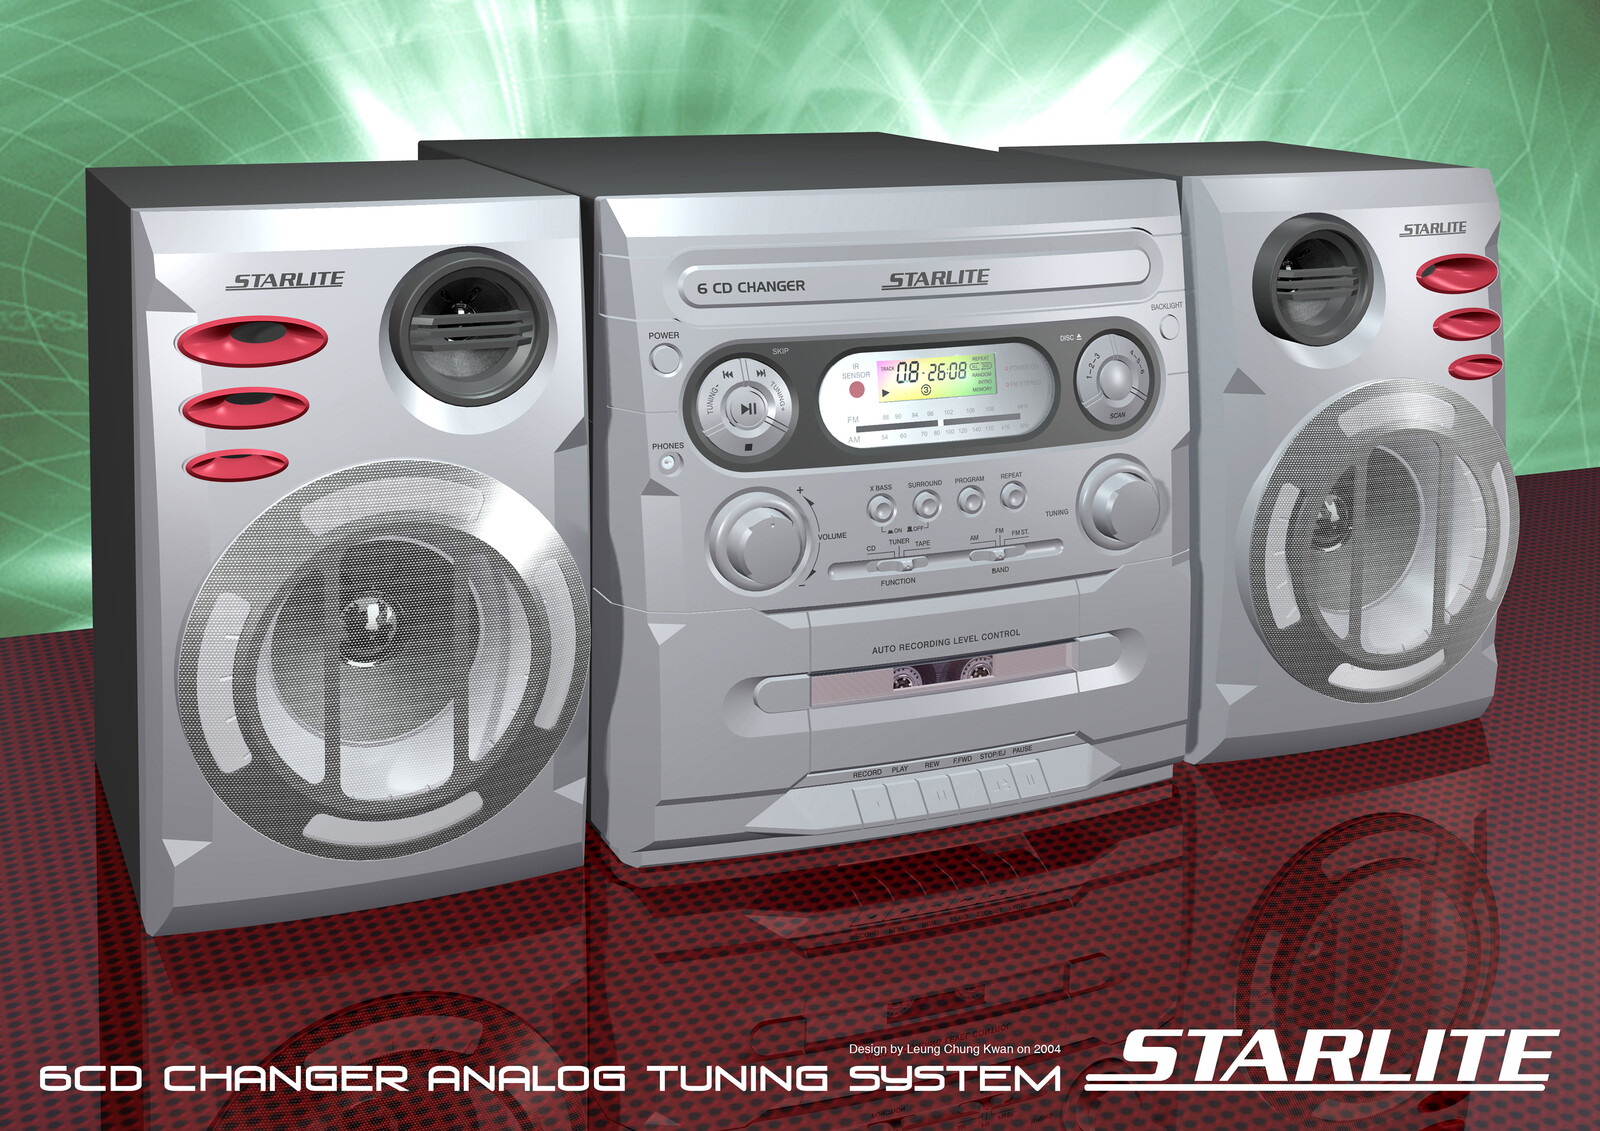 💎 6 CD Changer Analog Tuner with Single Cassette Hi-Fi | Design by Leung Chung Kwan on 2004 💎
Brand Name︰Starlite | Client︰Star Light Electronics Co., LTD.
Other Views︰http://bit.ly/sl03a-6cd-analog-single